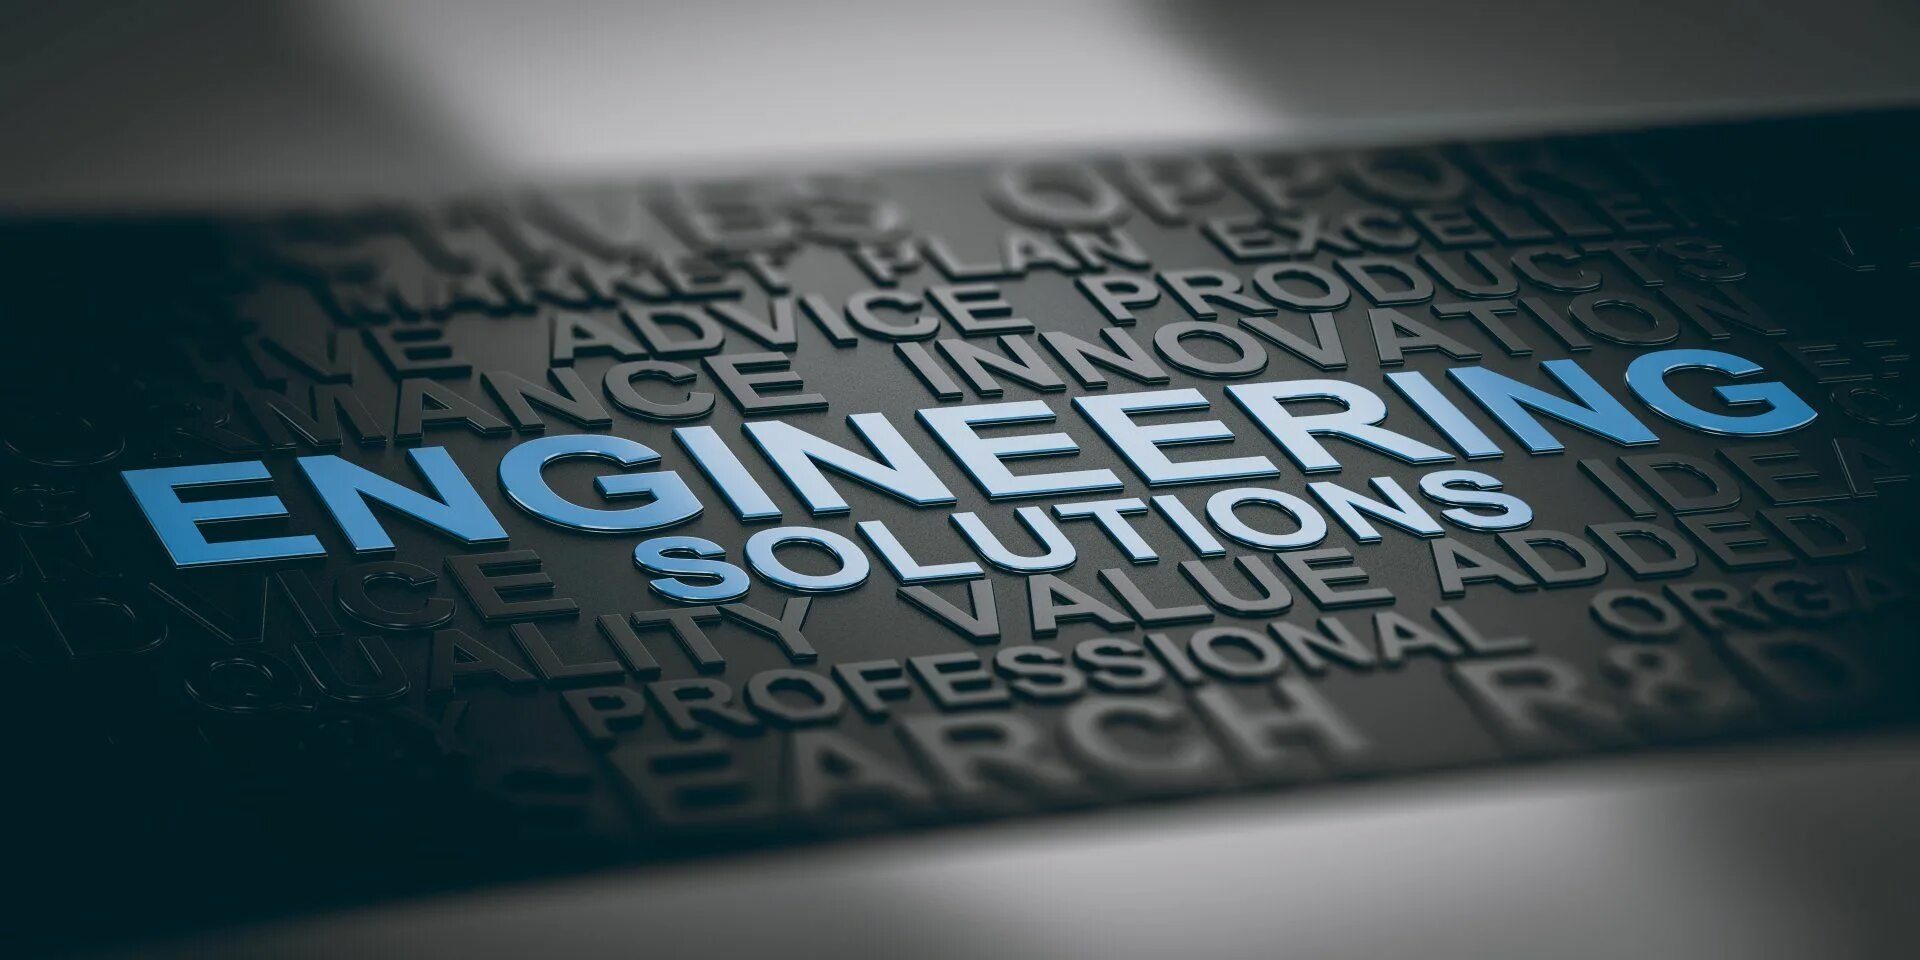 Tailor-made Engineering solutions logo. Griffpacht text engine.